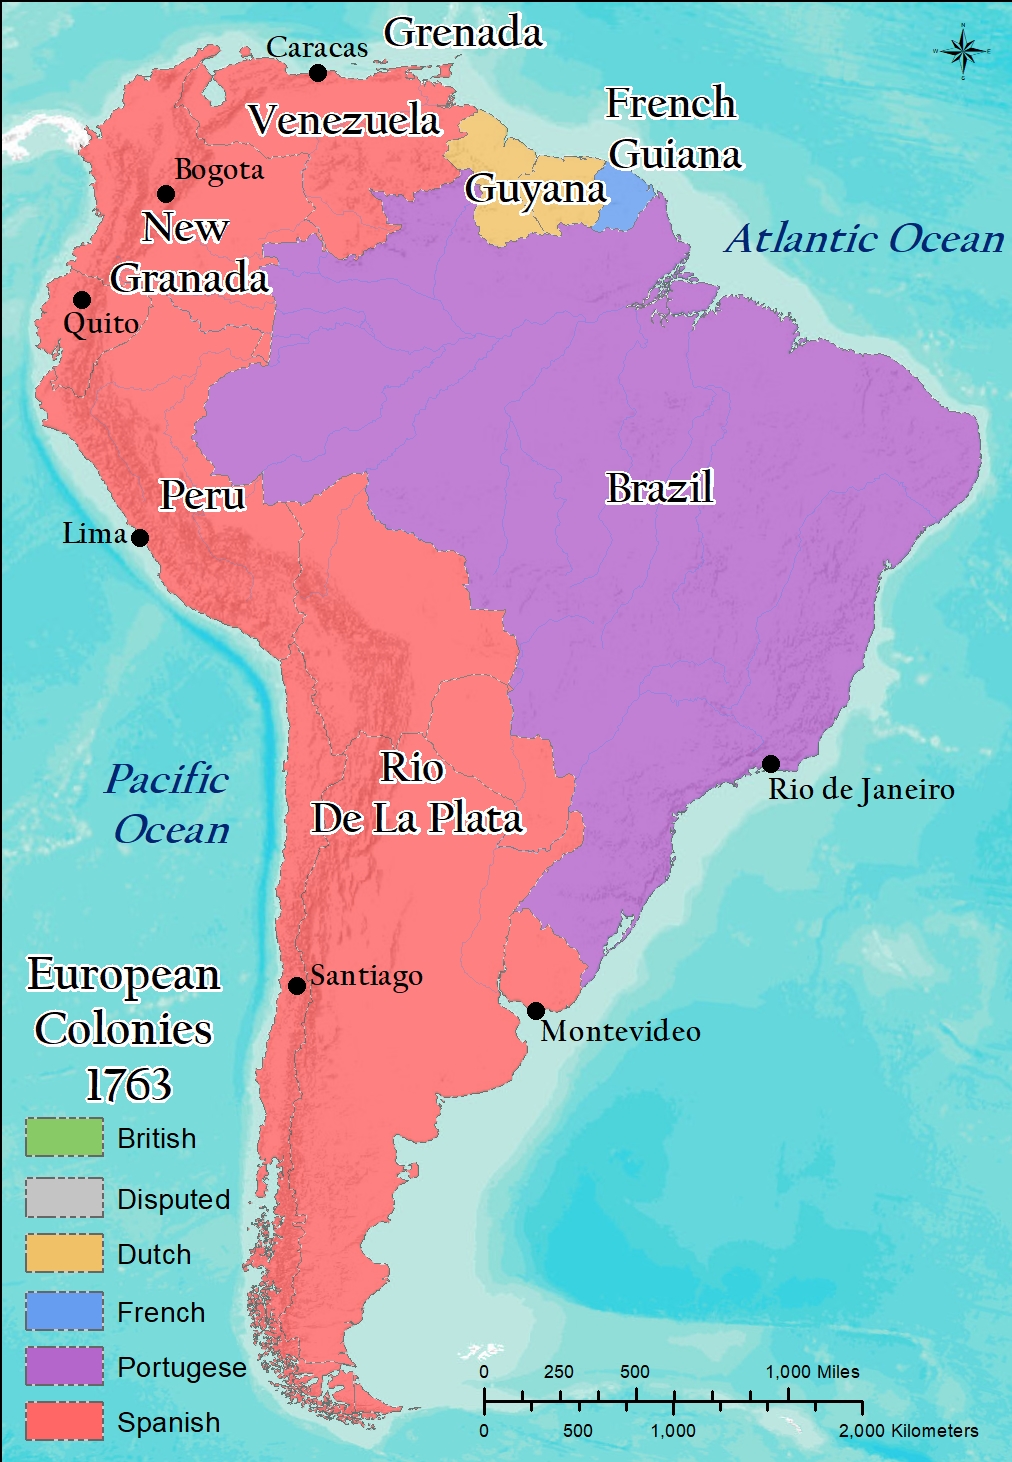 Latin America and the Caribbean (LACAR) – The Western World: Daily Readings on Geography